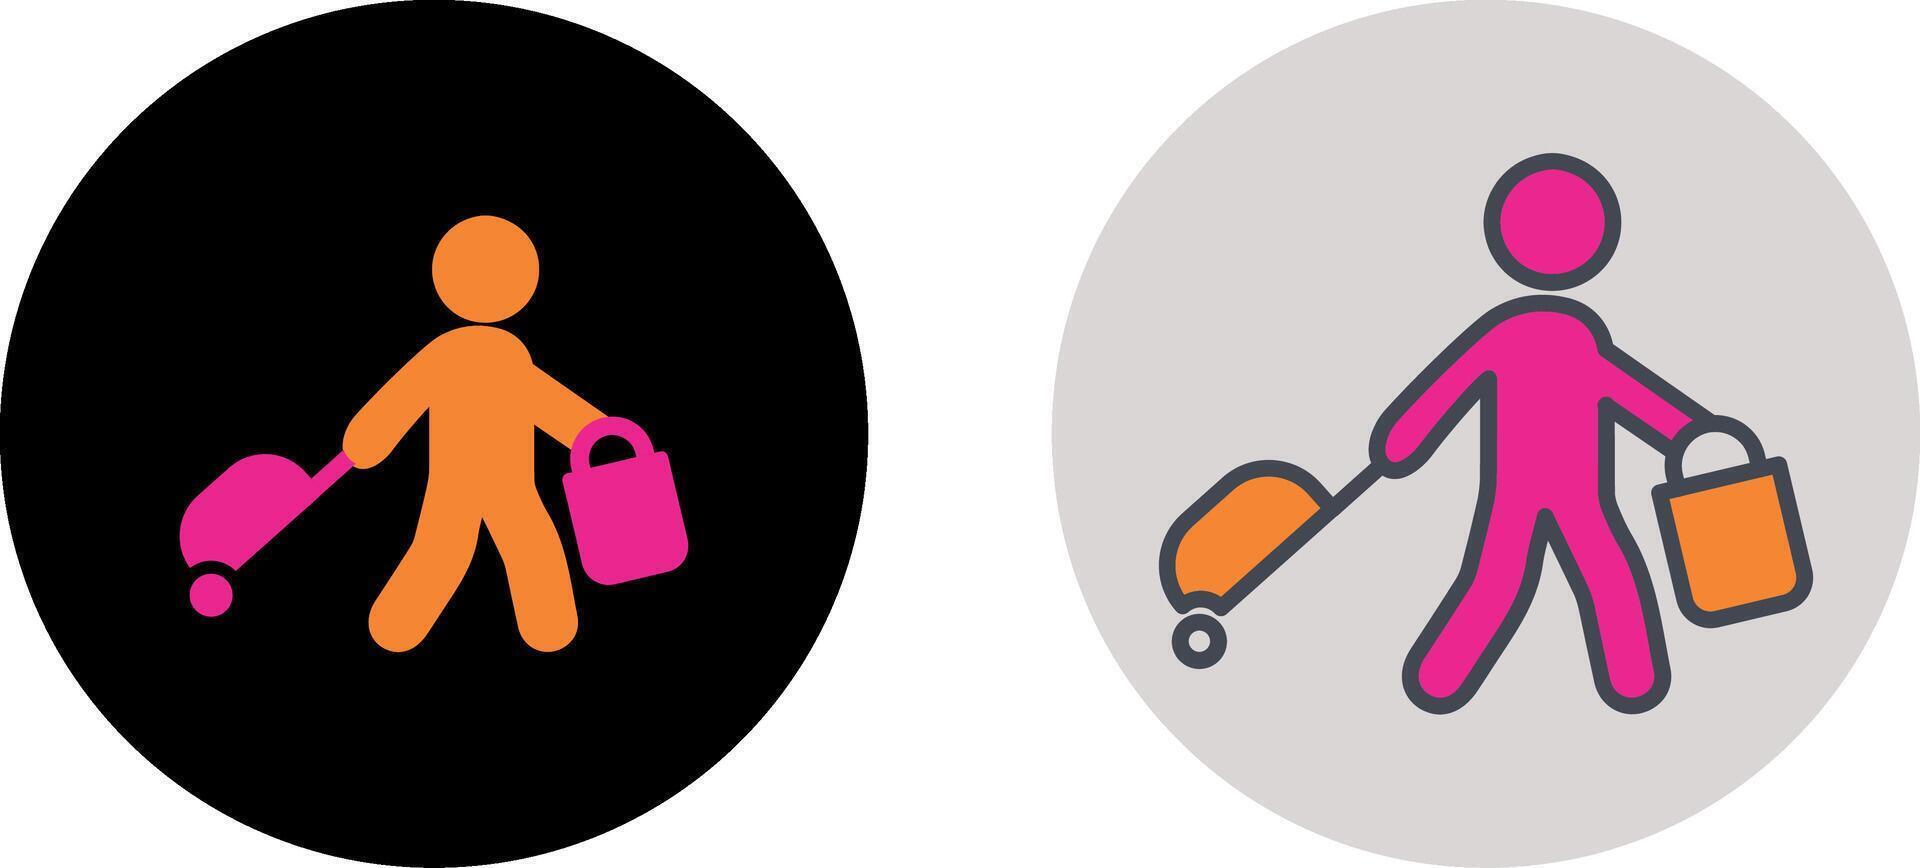 Carrying Bag Icon Design vector